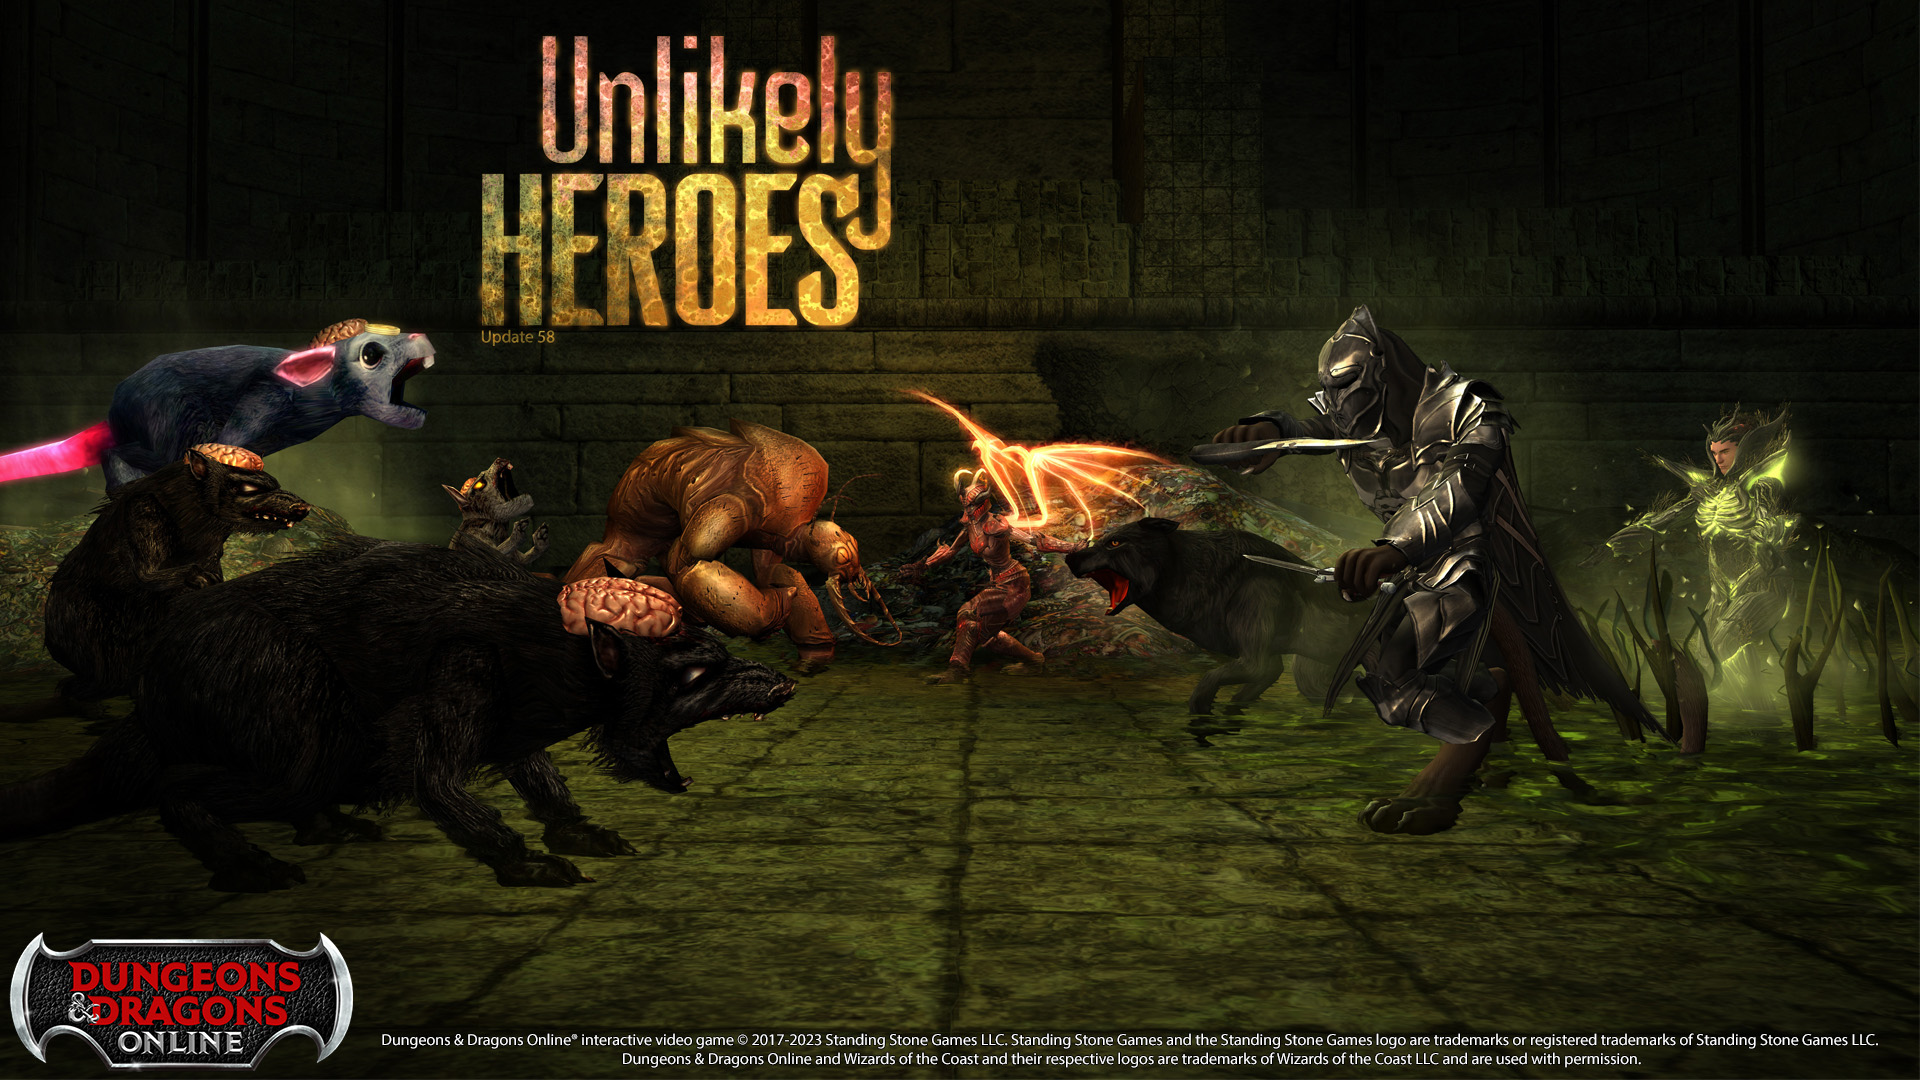 Dungeons & Dragons Online Celebrates 17th Anniversary with Update 58: Unlikely Heroes